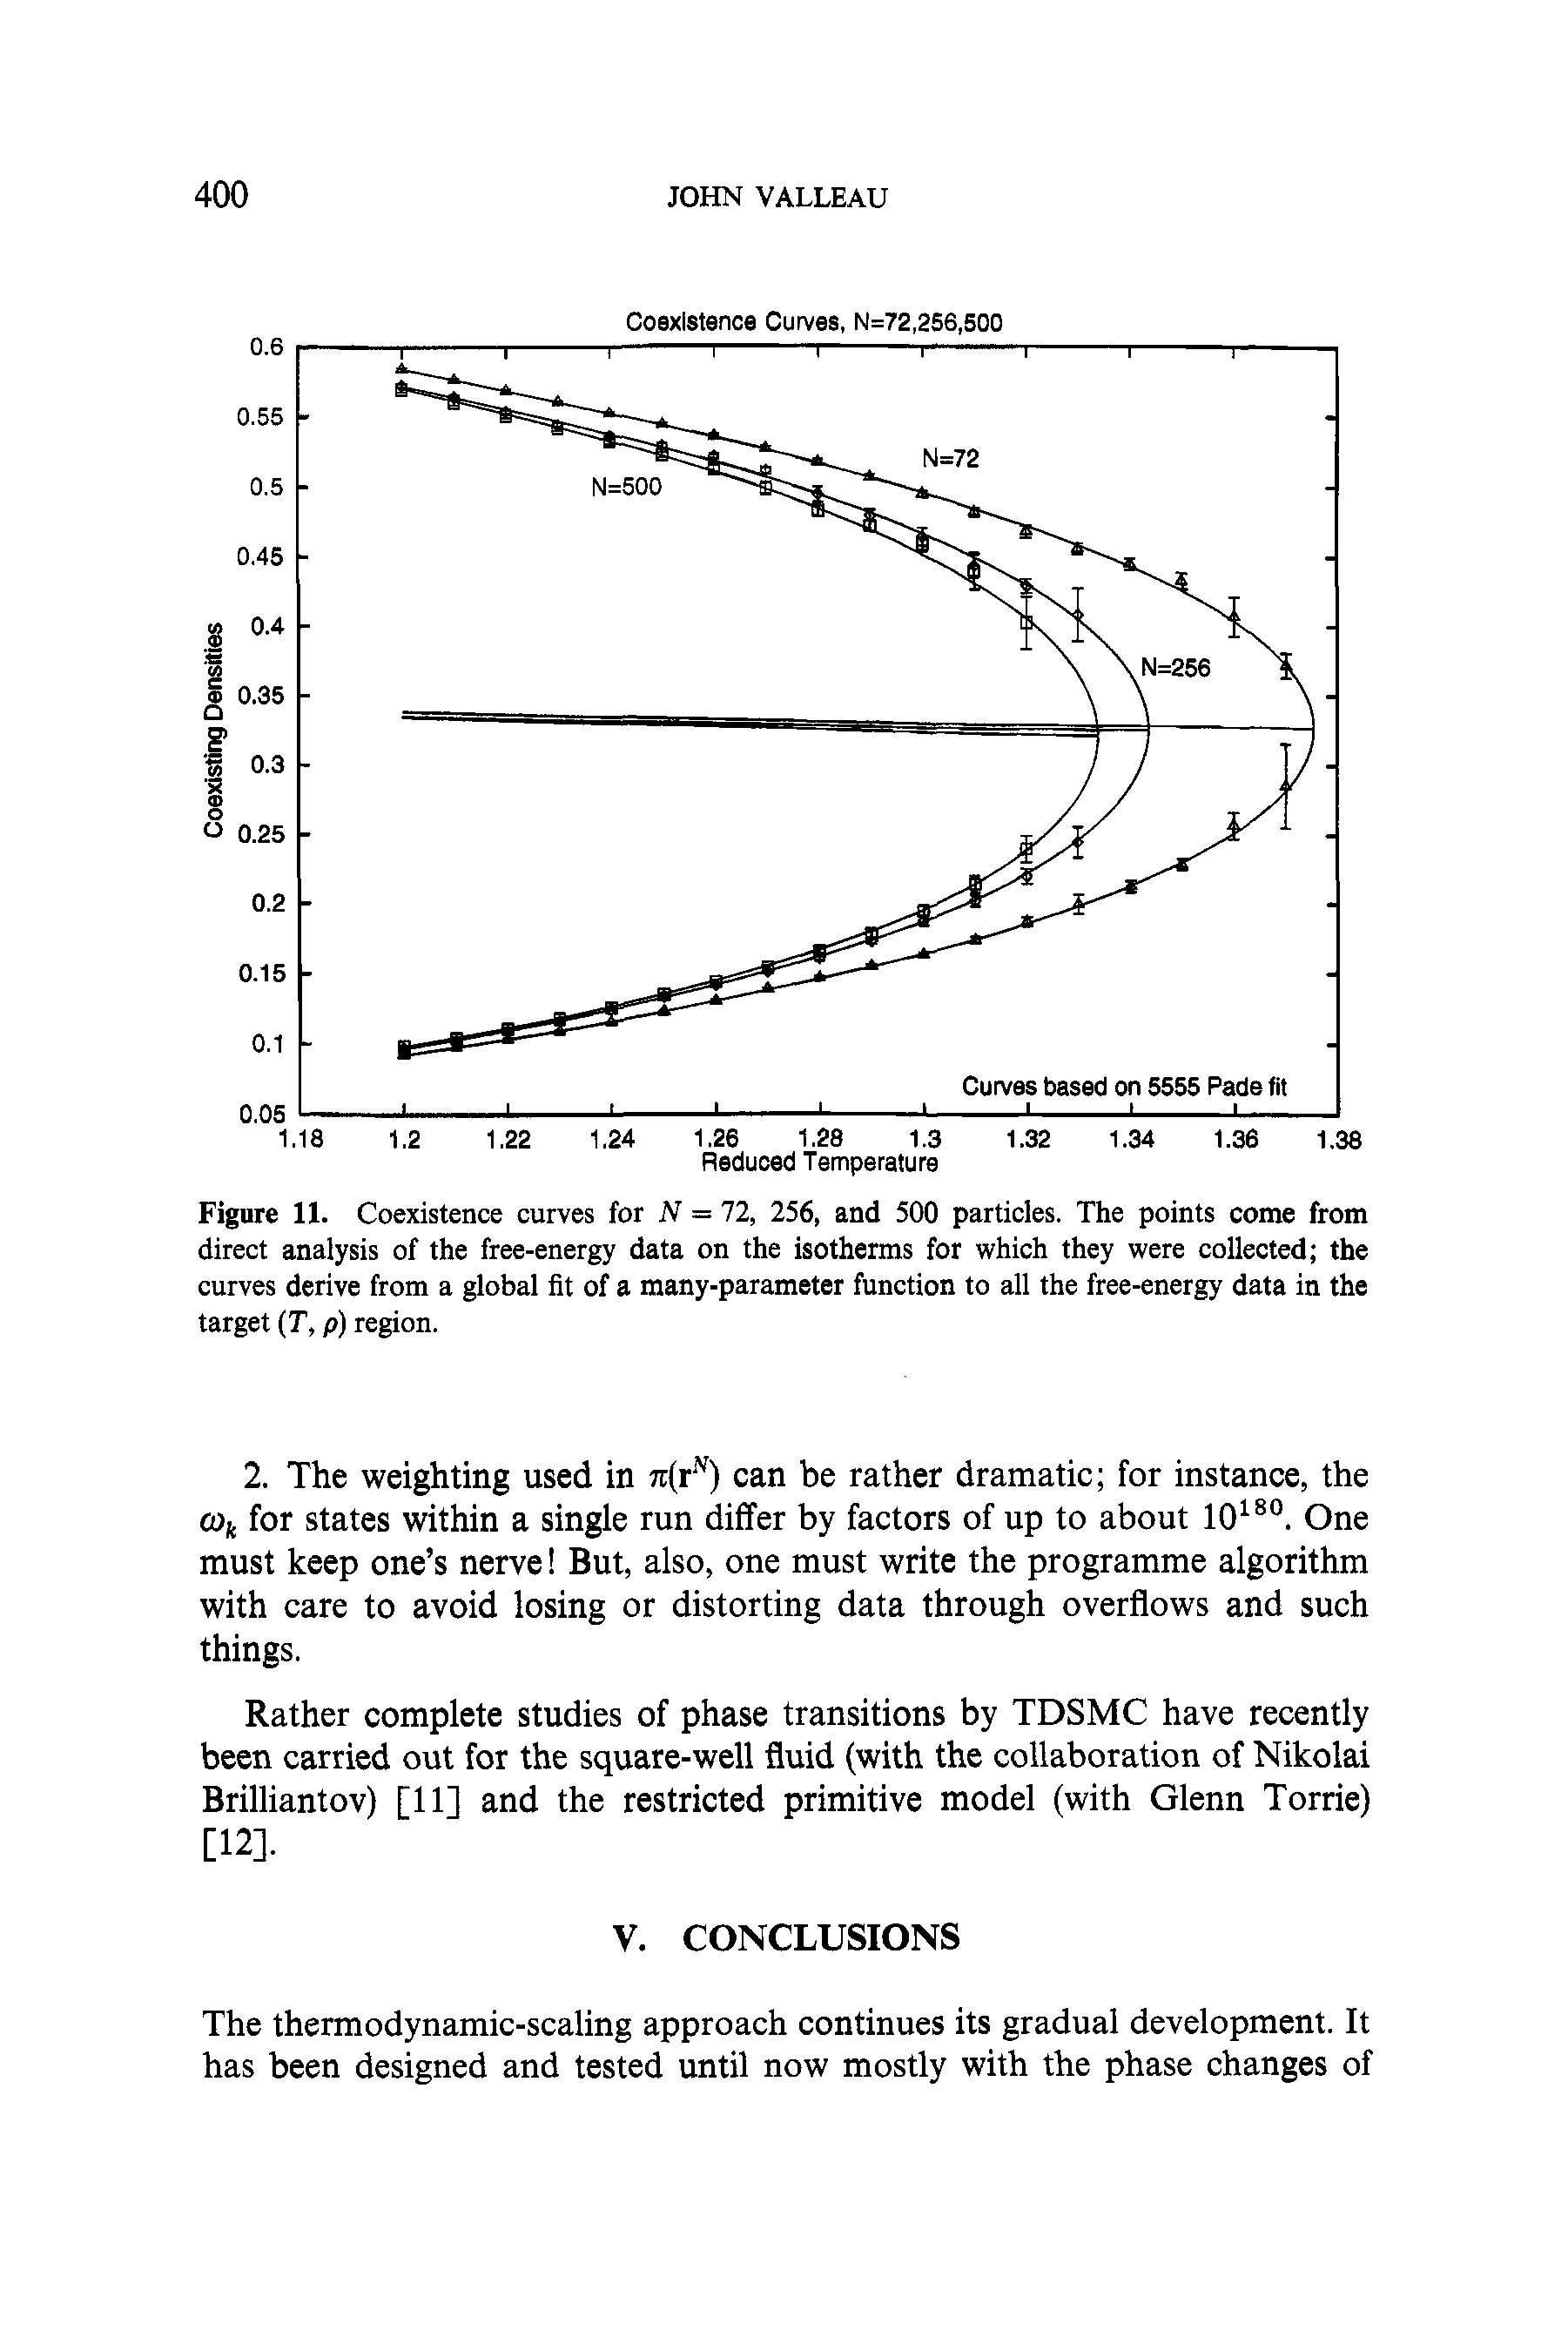 Figure IX. Coexistence curves for N = 72, 256, and 500 particles. The points come from direct analysis of the free-energy data on the isotherms for which they were collected the curves derive from a global fit of a many-parameter function to all the free-energy data in the target (T, p) region.